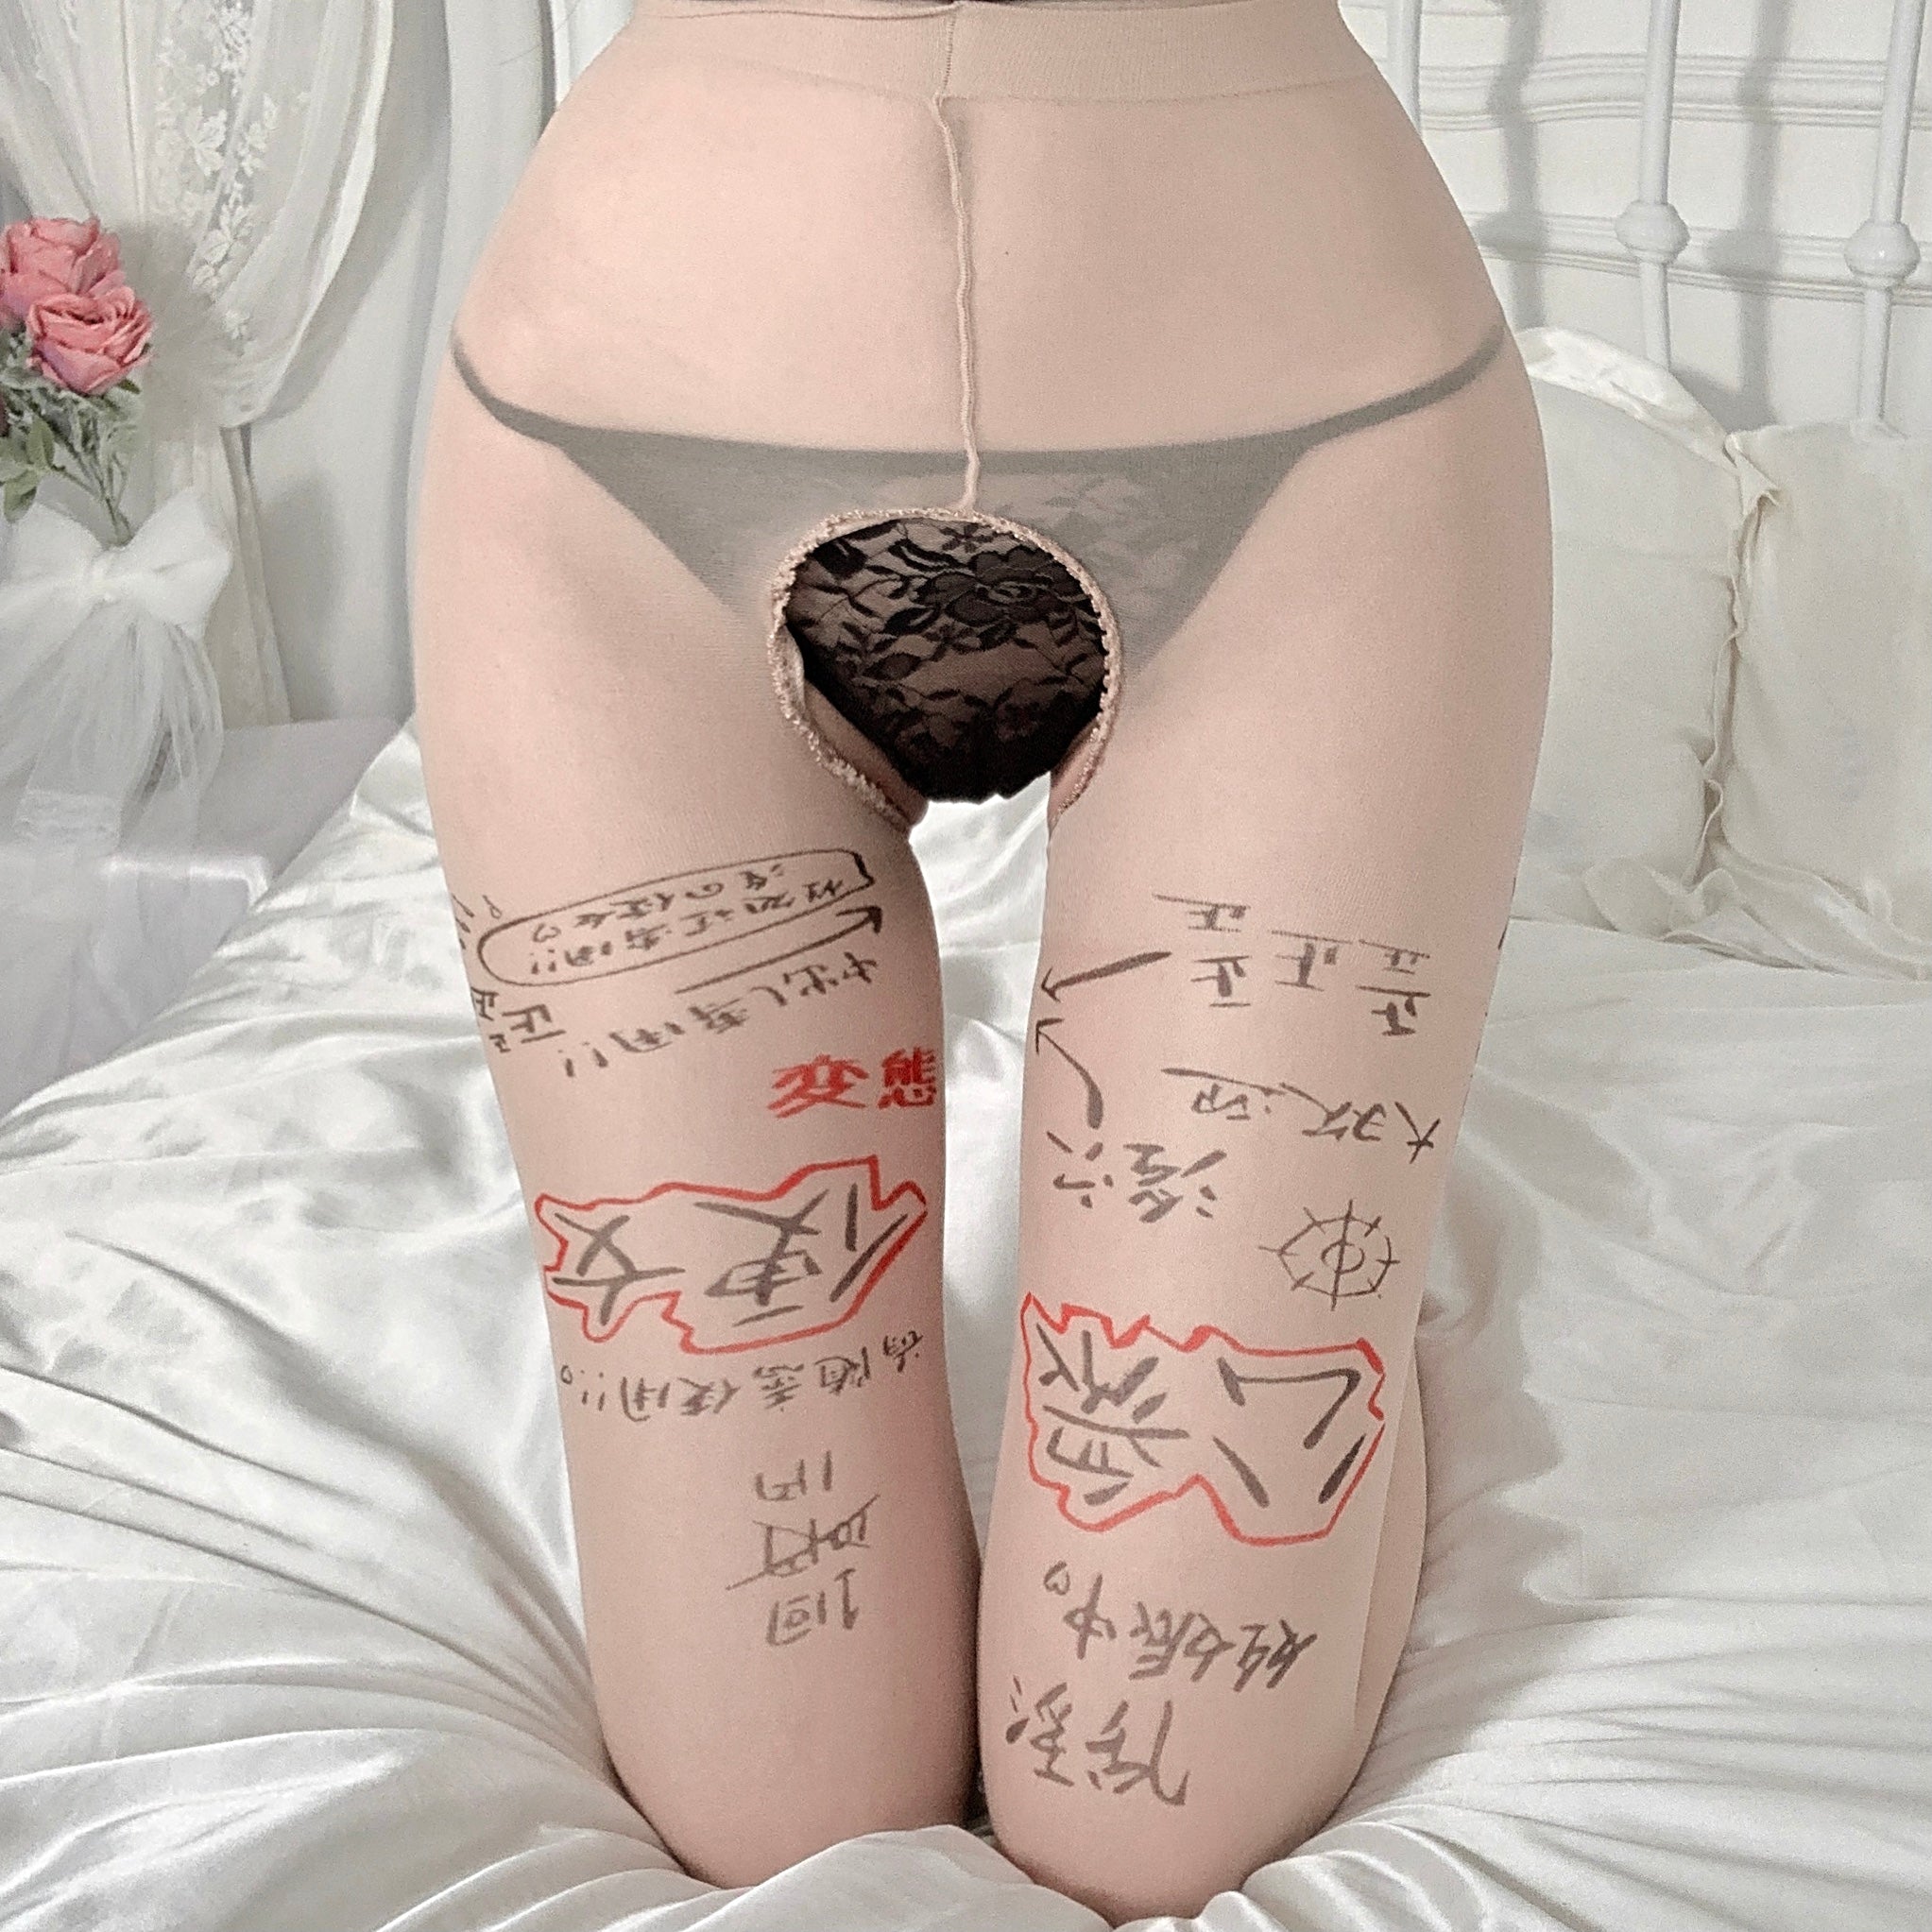 Women Sexy Crotch Opening High Waist Stocking With Dirty Chinese Words in Flesh Color